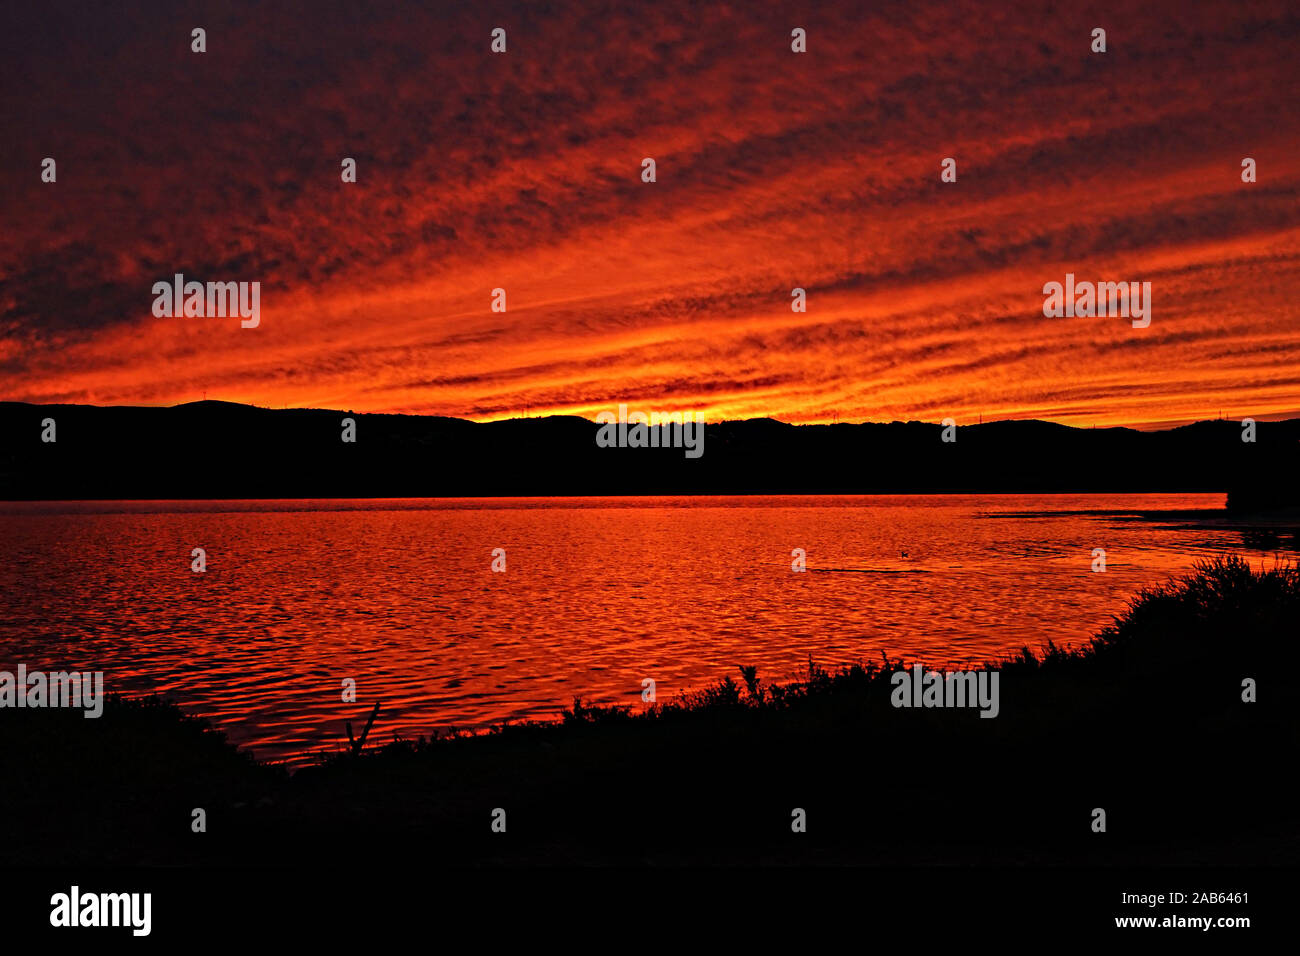 Black silhouette landscape against a colourful sunset sky Stock Photo